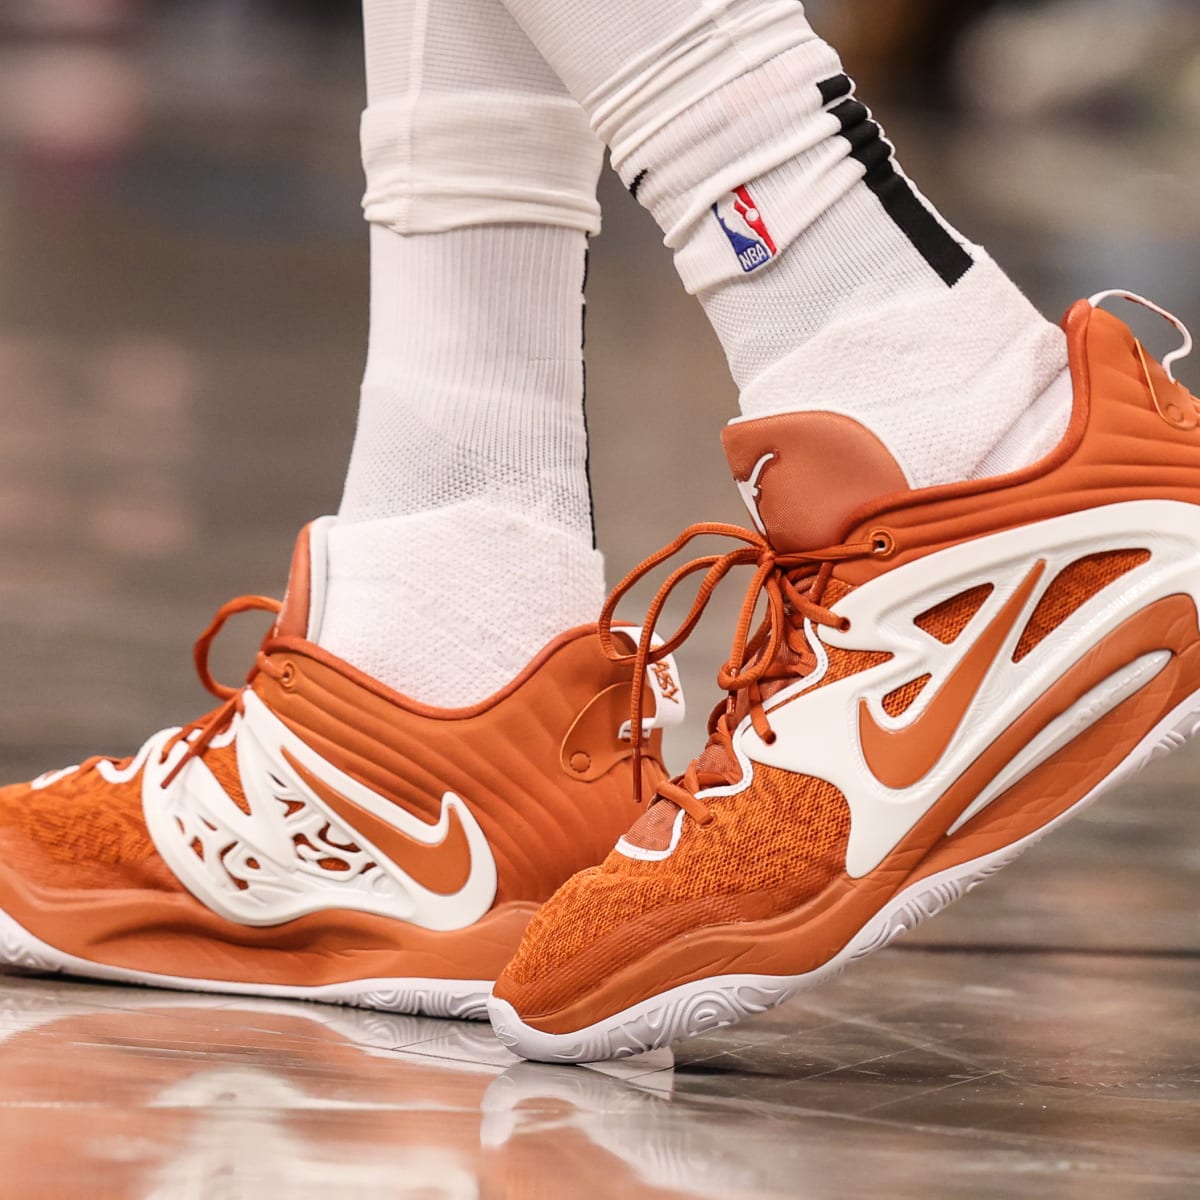 The 5 Most Popular Shoes Worn in the 2022-23 NBA Season - Sports